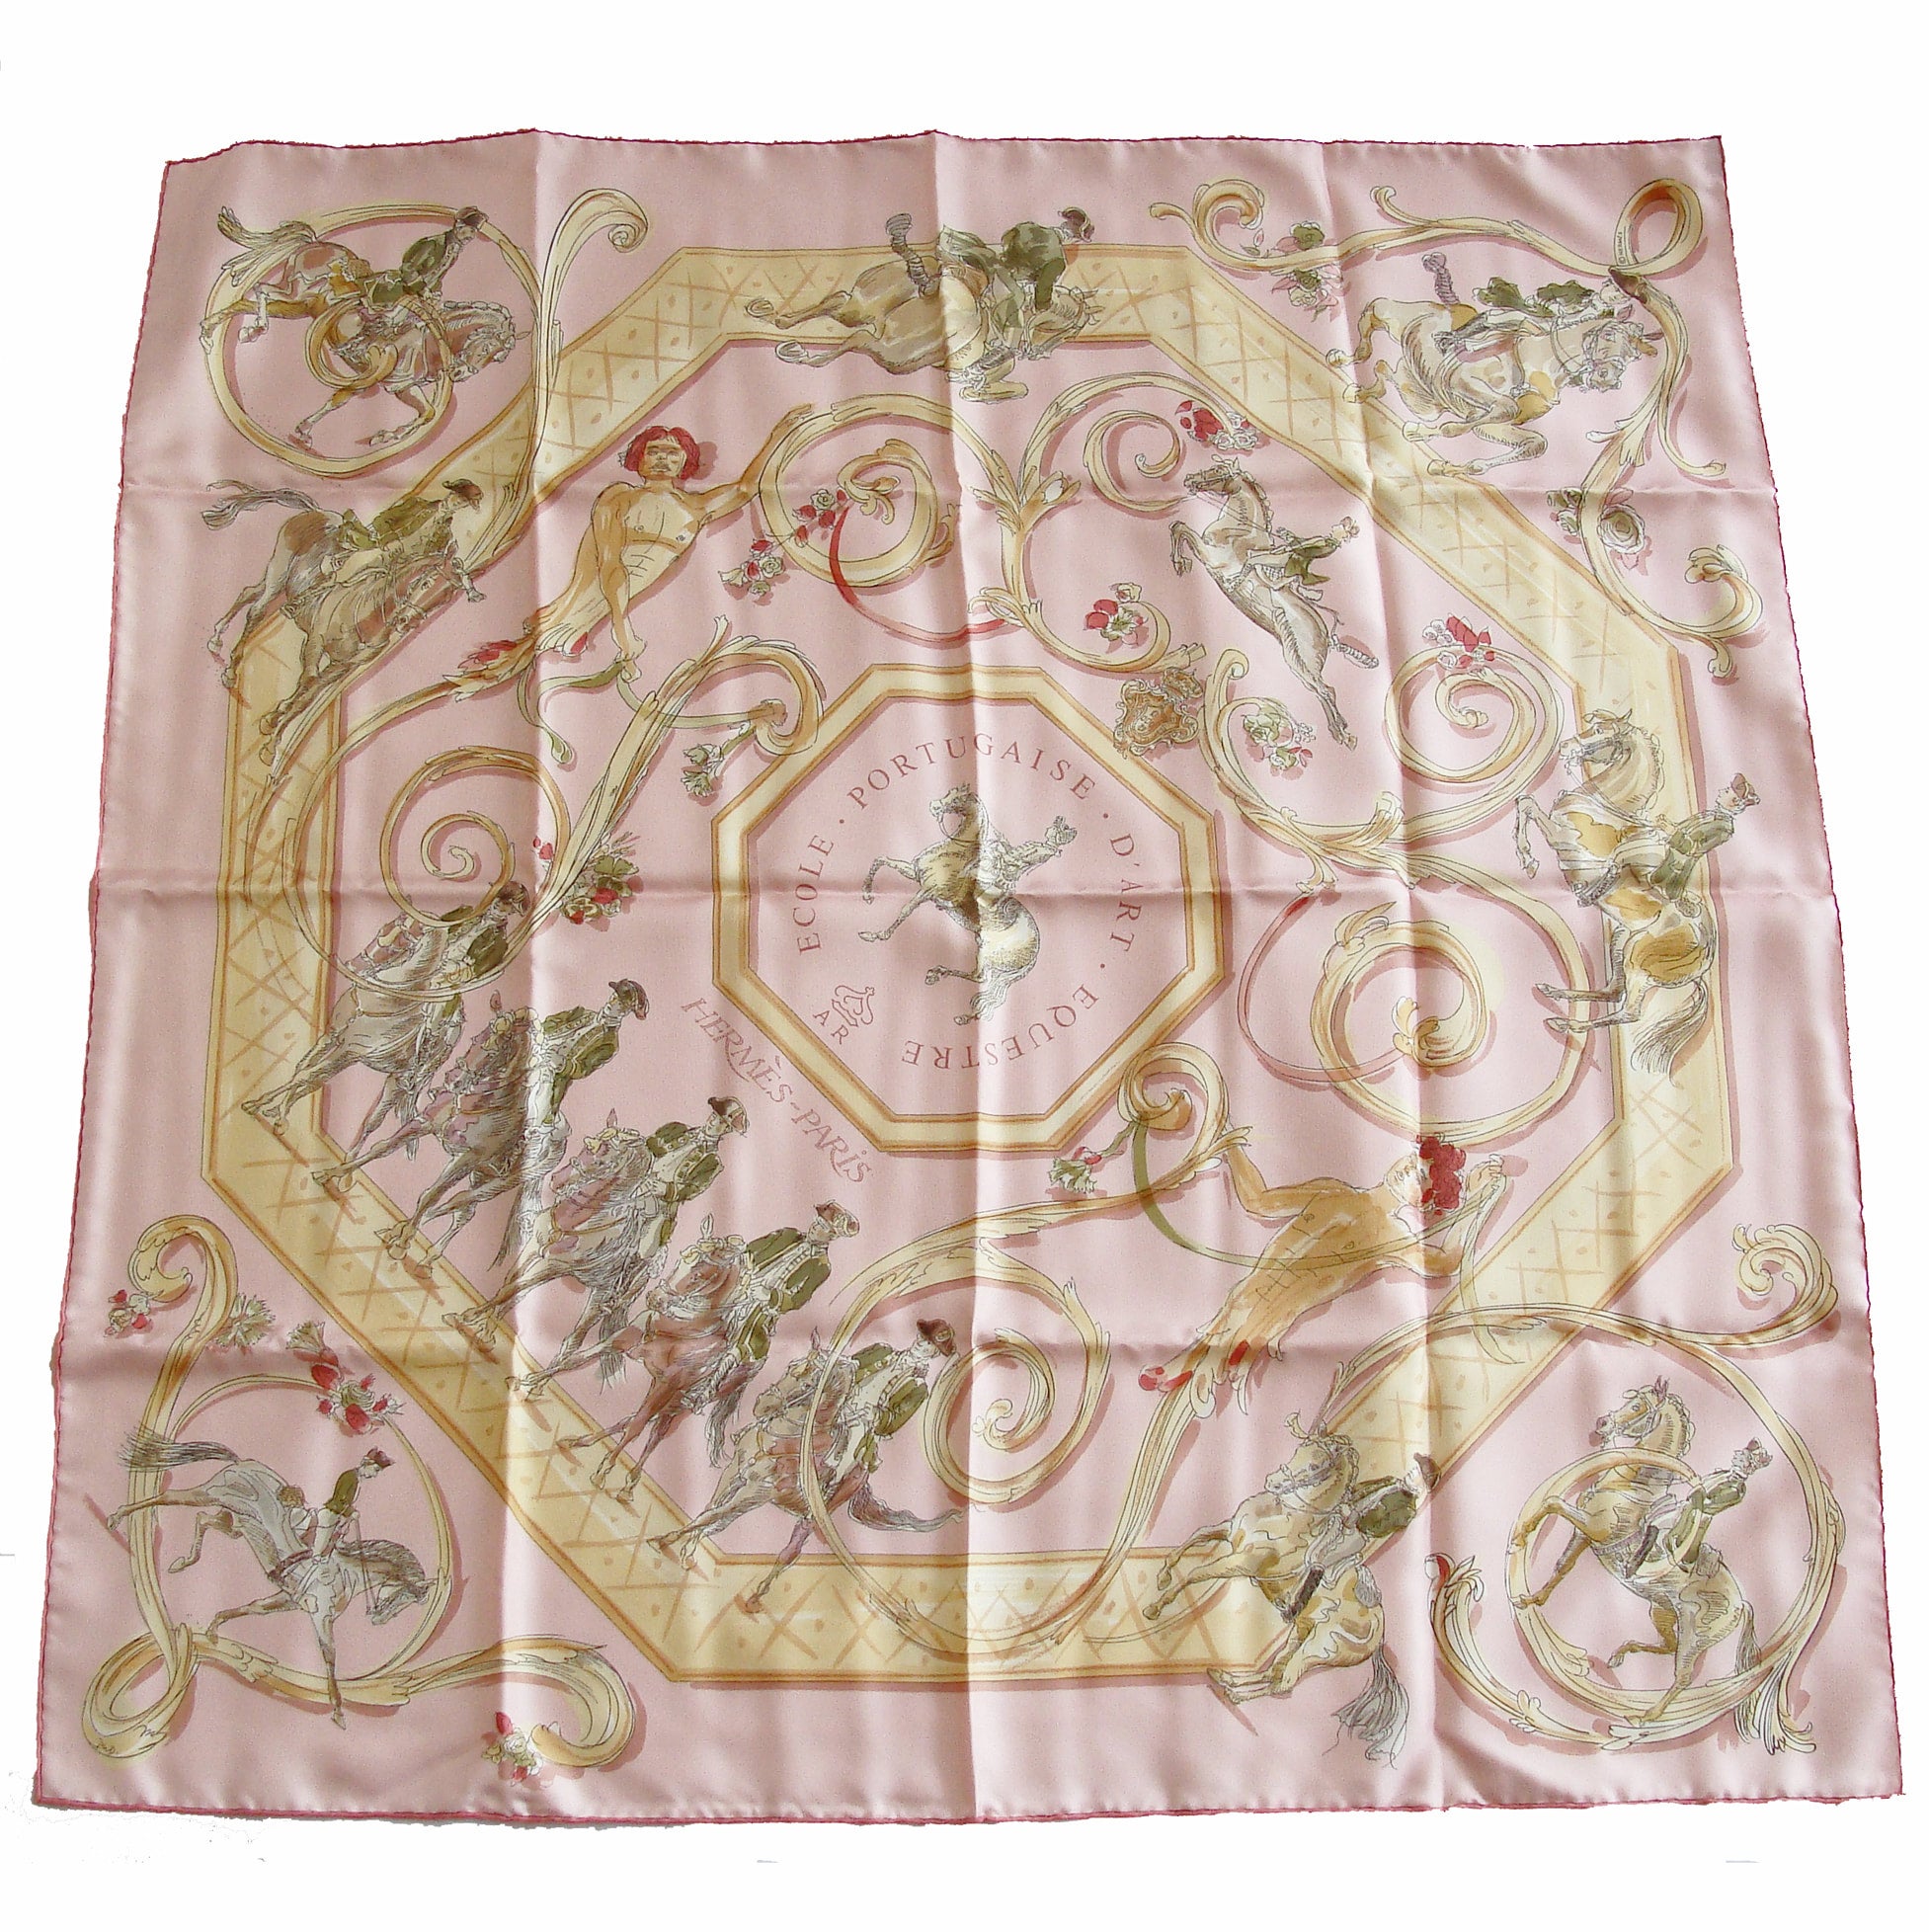 HERMES Ecole Portugaise d'Art Equestre silk scarf – Collections